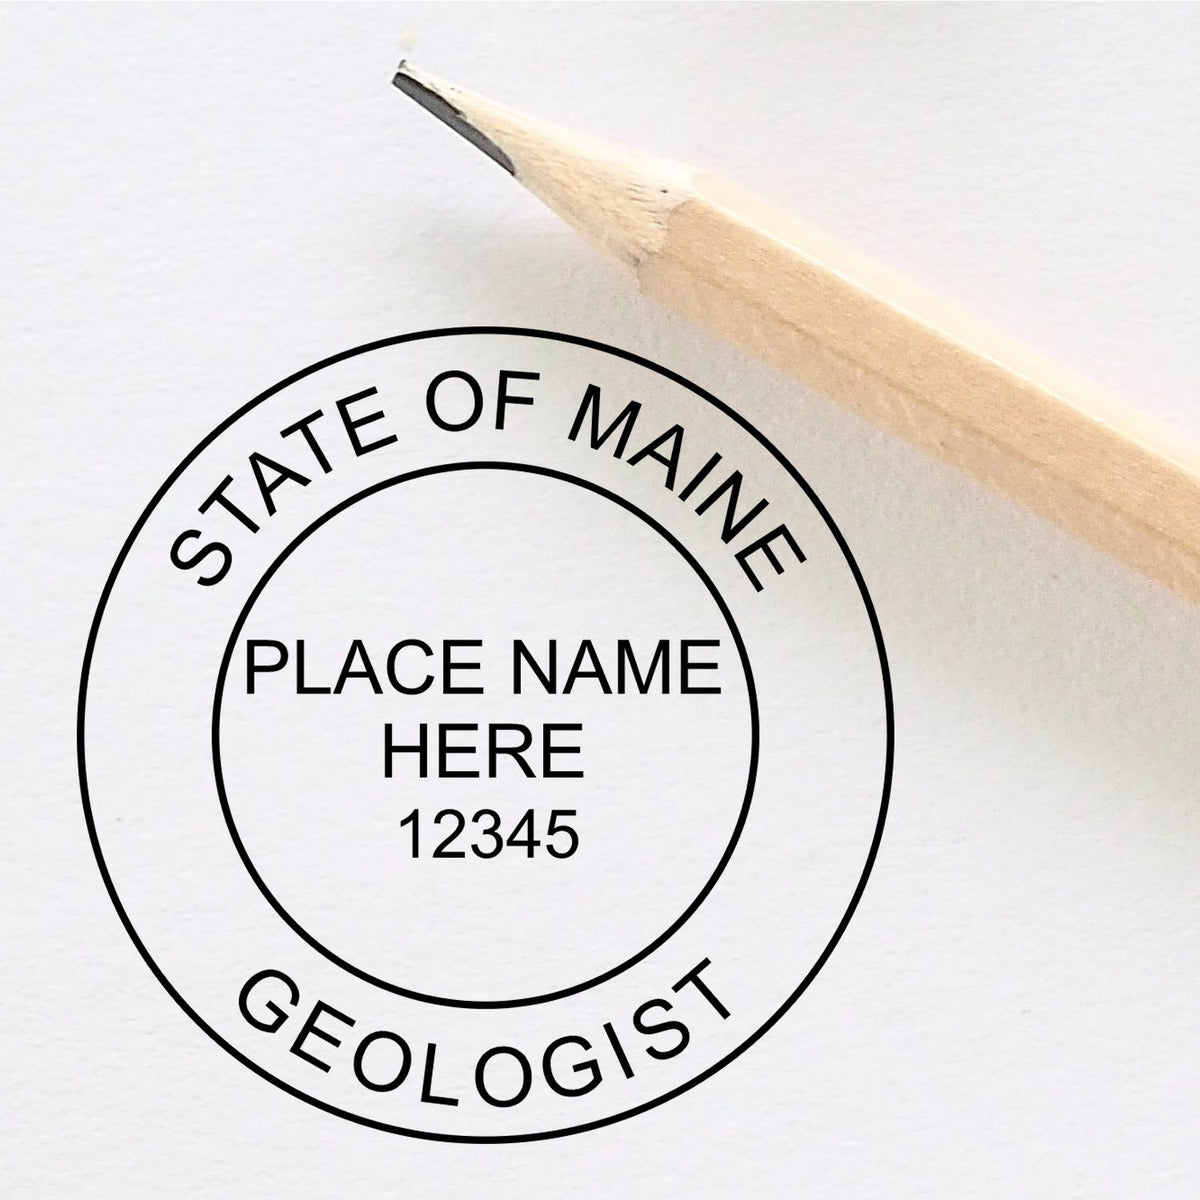 This paper is stamped with a sample imprint of the Premium MaxLight Pre-Inked Maine Geology Stamp, signifying its quality and reliability.